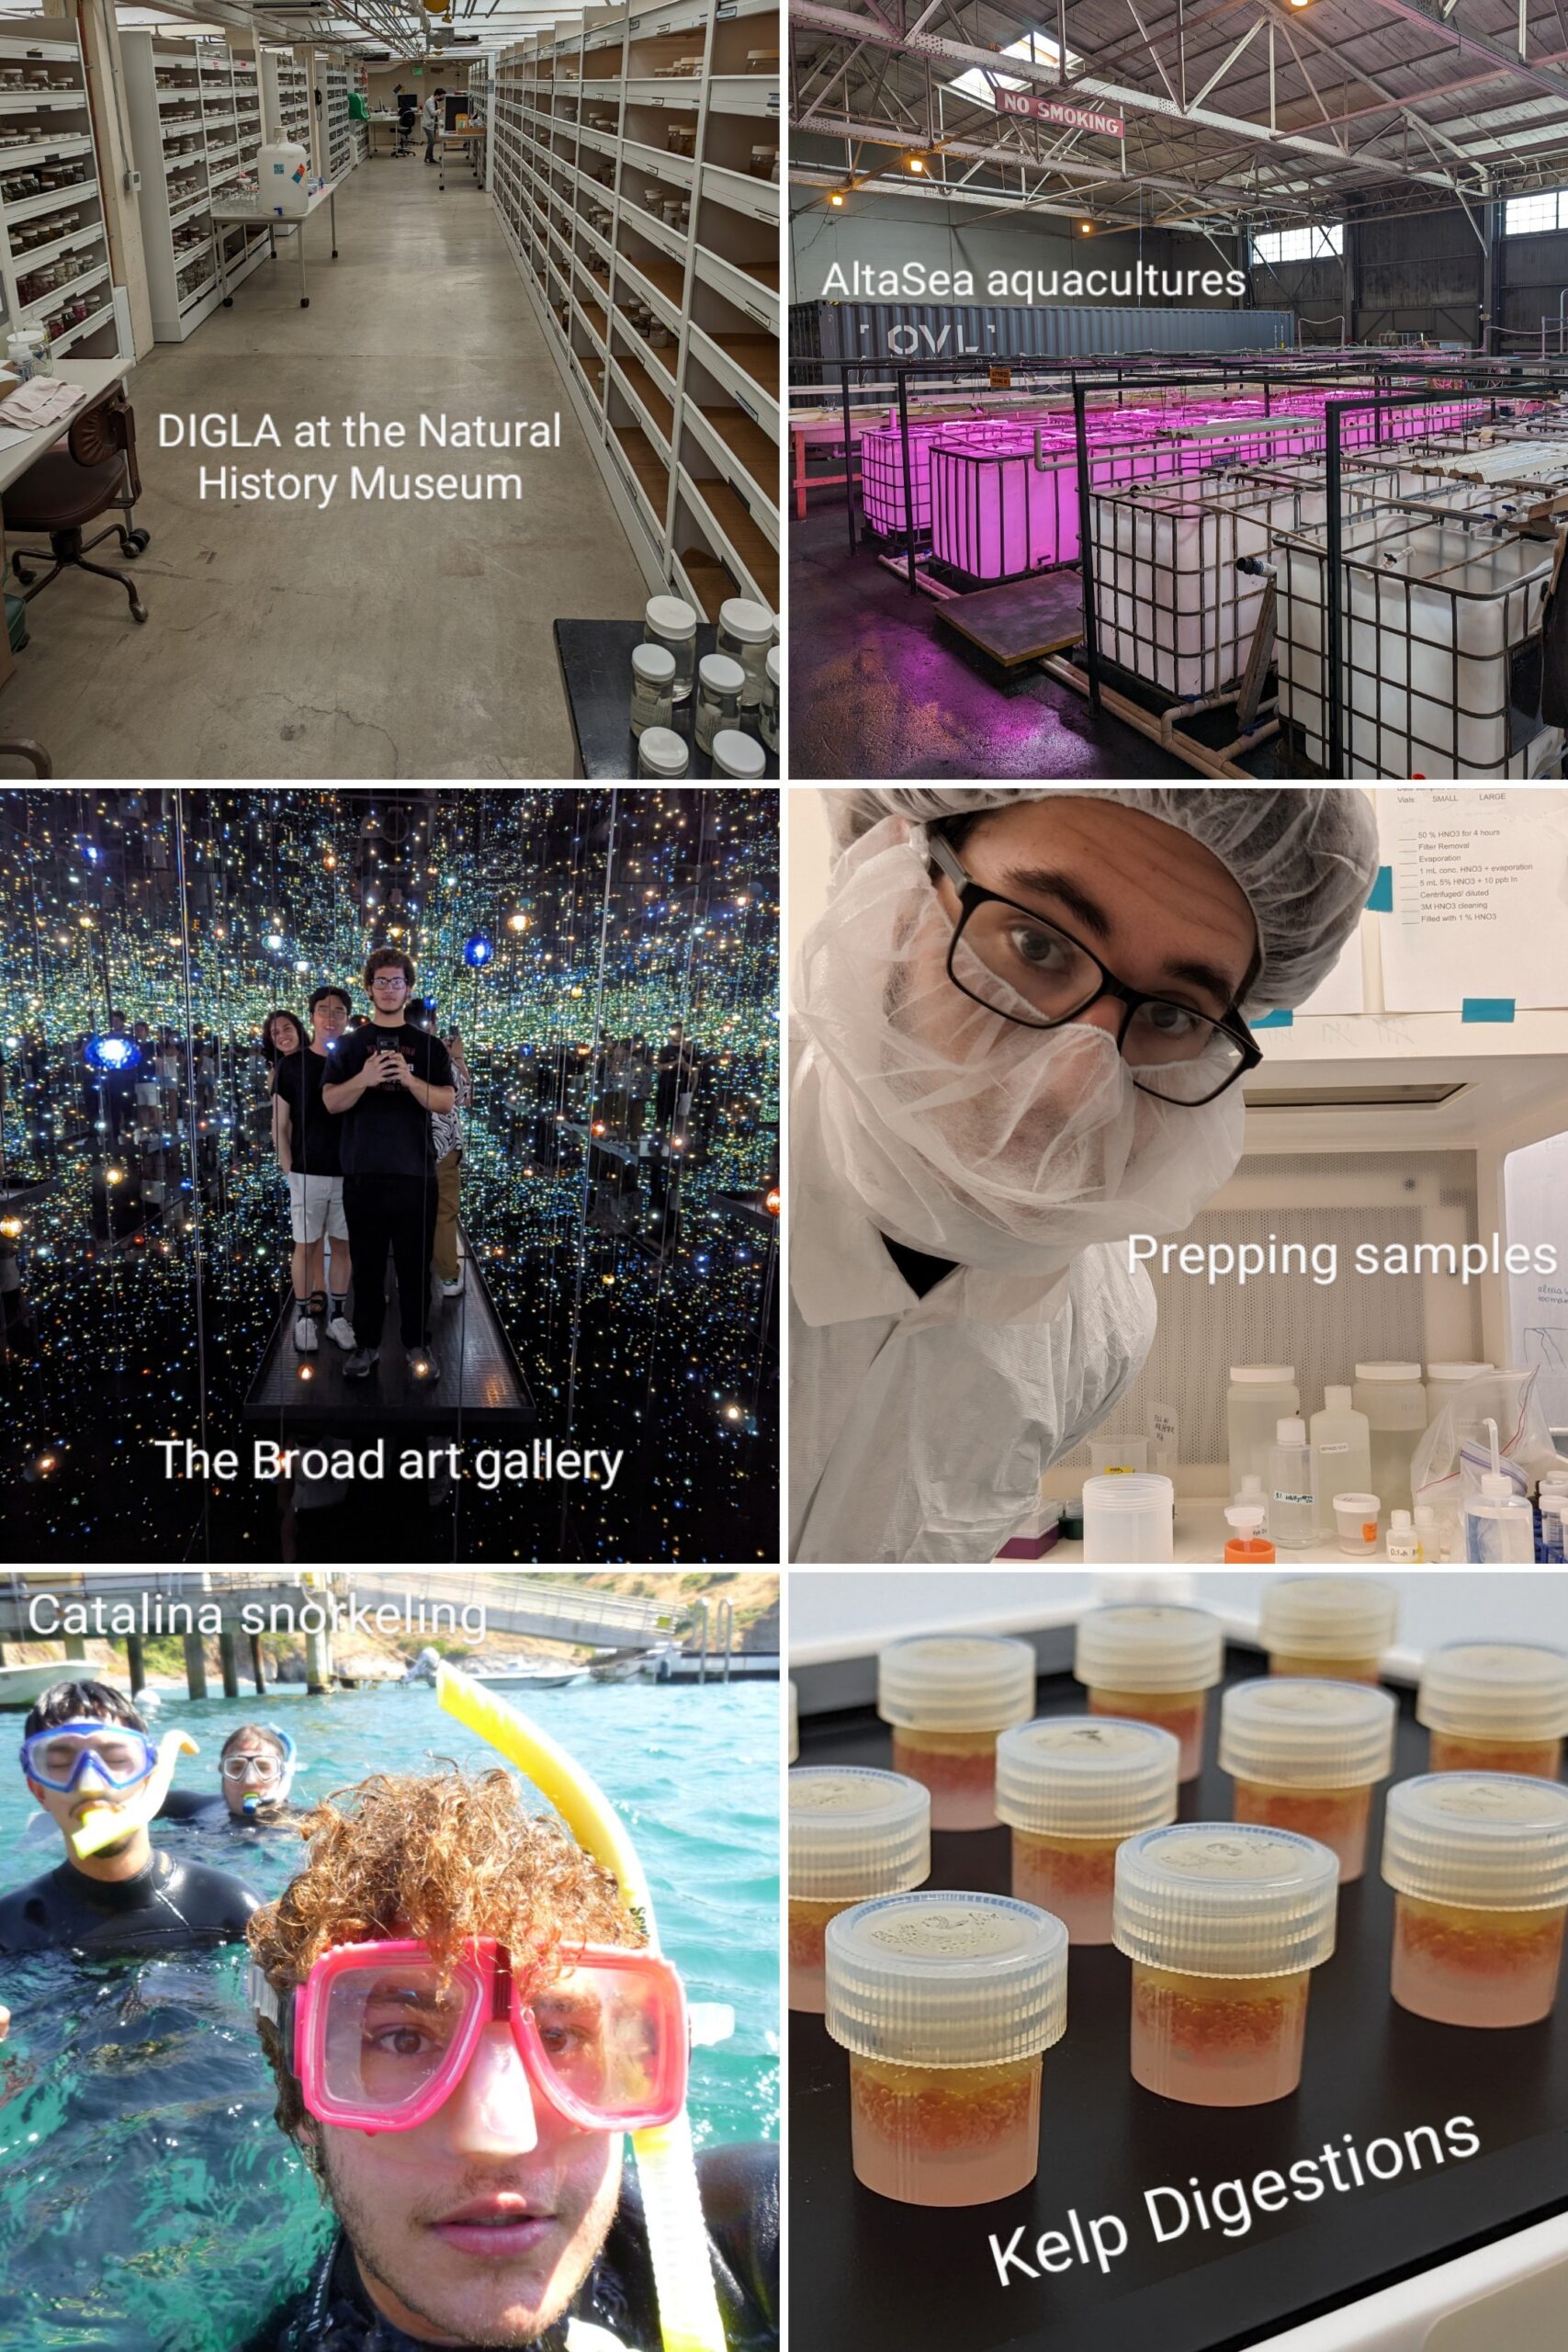 collage of six images. 1: shelves full of marine invertebrate collections at the National History Museum of Los Angeles overlaid with the text "DIGLA at the Natural History Museum"; 2: rows of aquaculture tanks at overlaid with the text "AltaSea aquacultures", 3. a small group of people gathered in front of an art installation consisting of mirrors and hanging lights overlaid with the text "The Broad art gallery"; 4. person wearing a white lab coat, head cover, and mask takes a selfie by lab samples overlaid with the text "Prepping samples"; 5. person in snorkel gear takes a selfie with other snorkelers in the above water overlaid with the text "Catalina snorkeling"; 6. neat rows of containers on a desk full of red matter overlayed with the text "Kelp Digestions"